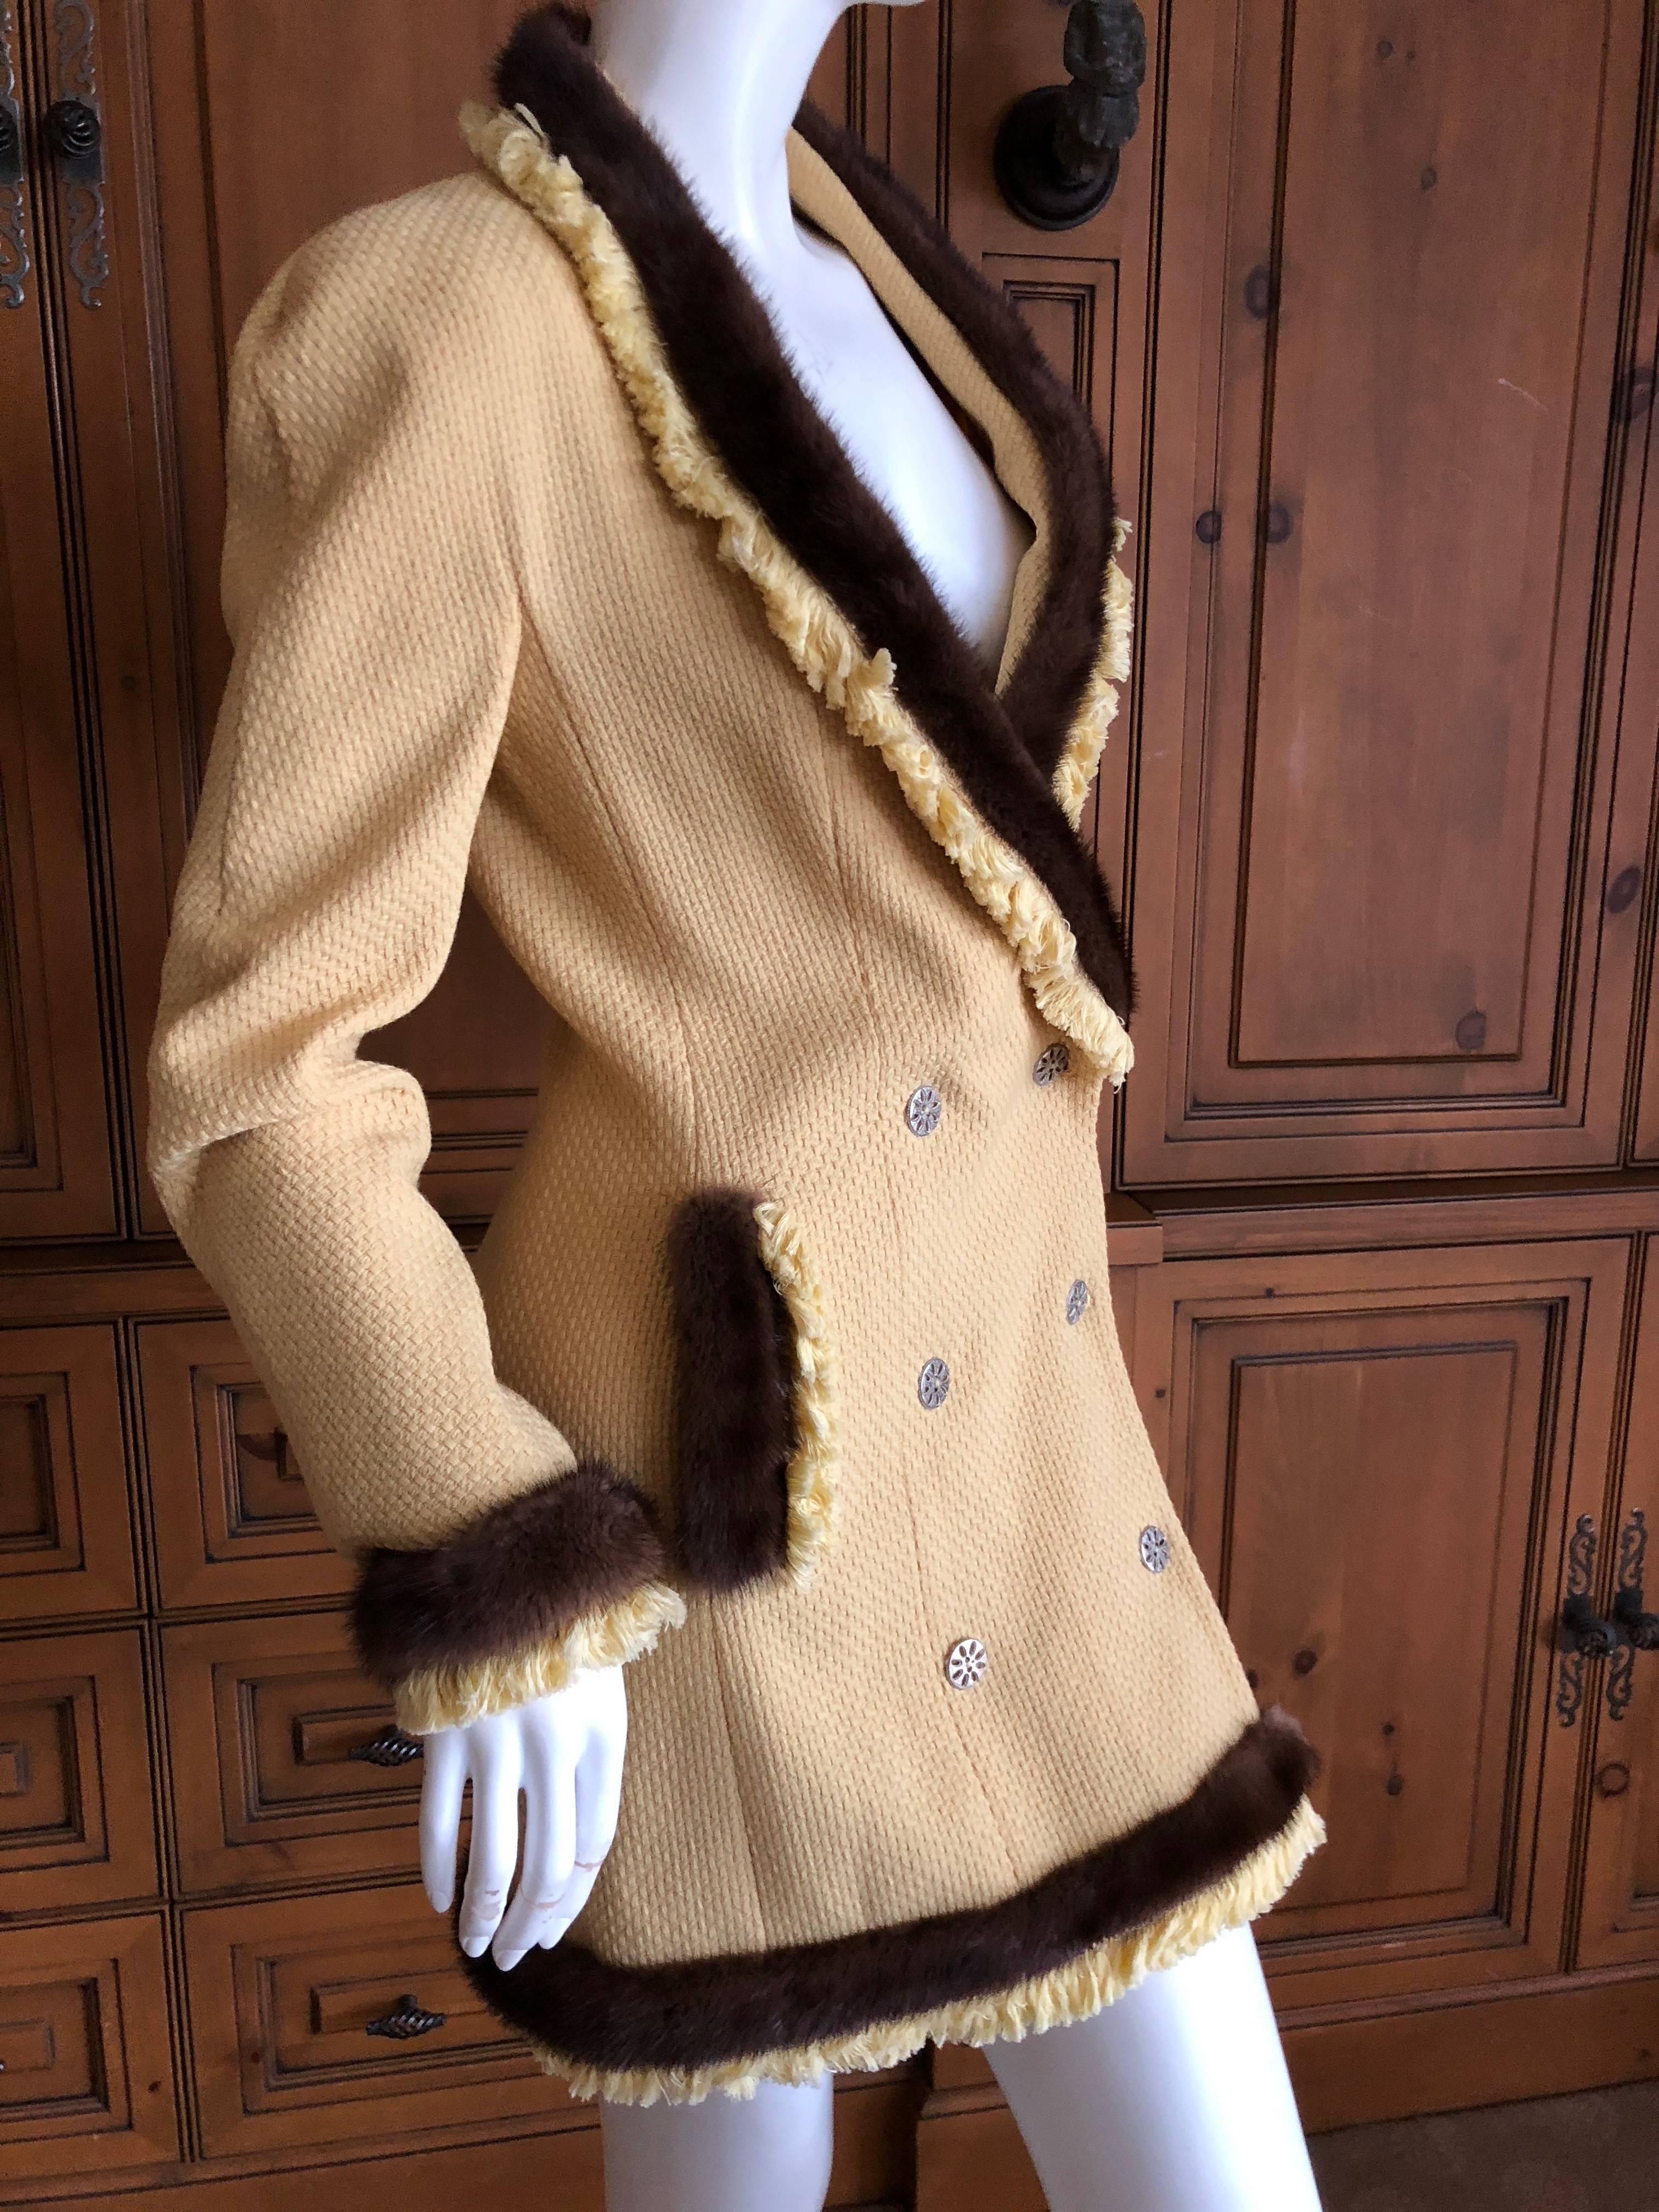 Christian Dior by John Galliano Autumn 1997 Mink Trim Yellow Boucle Coat Dress In Excellent Condition For Sale In Cloverdale, CA